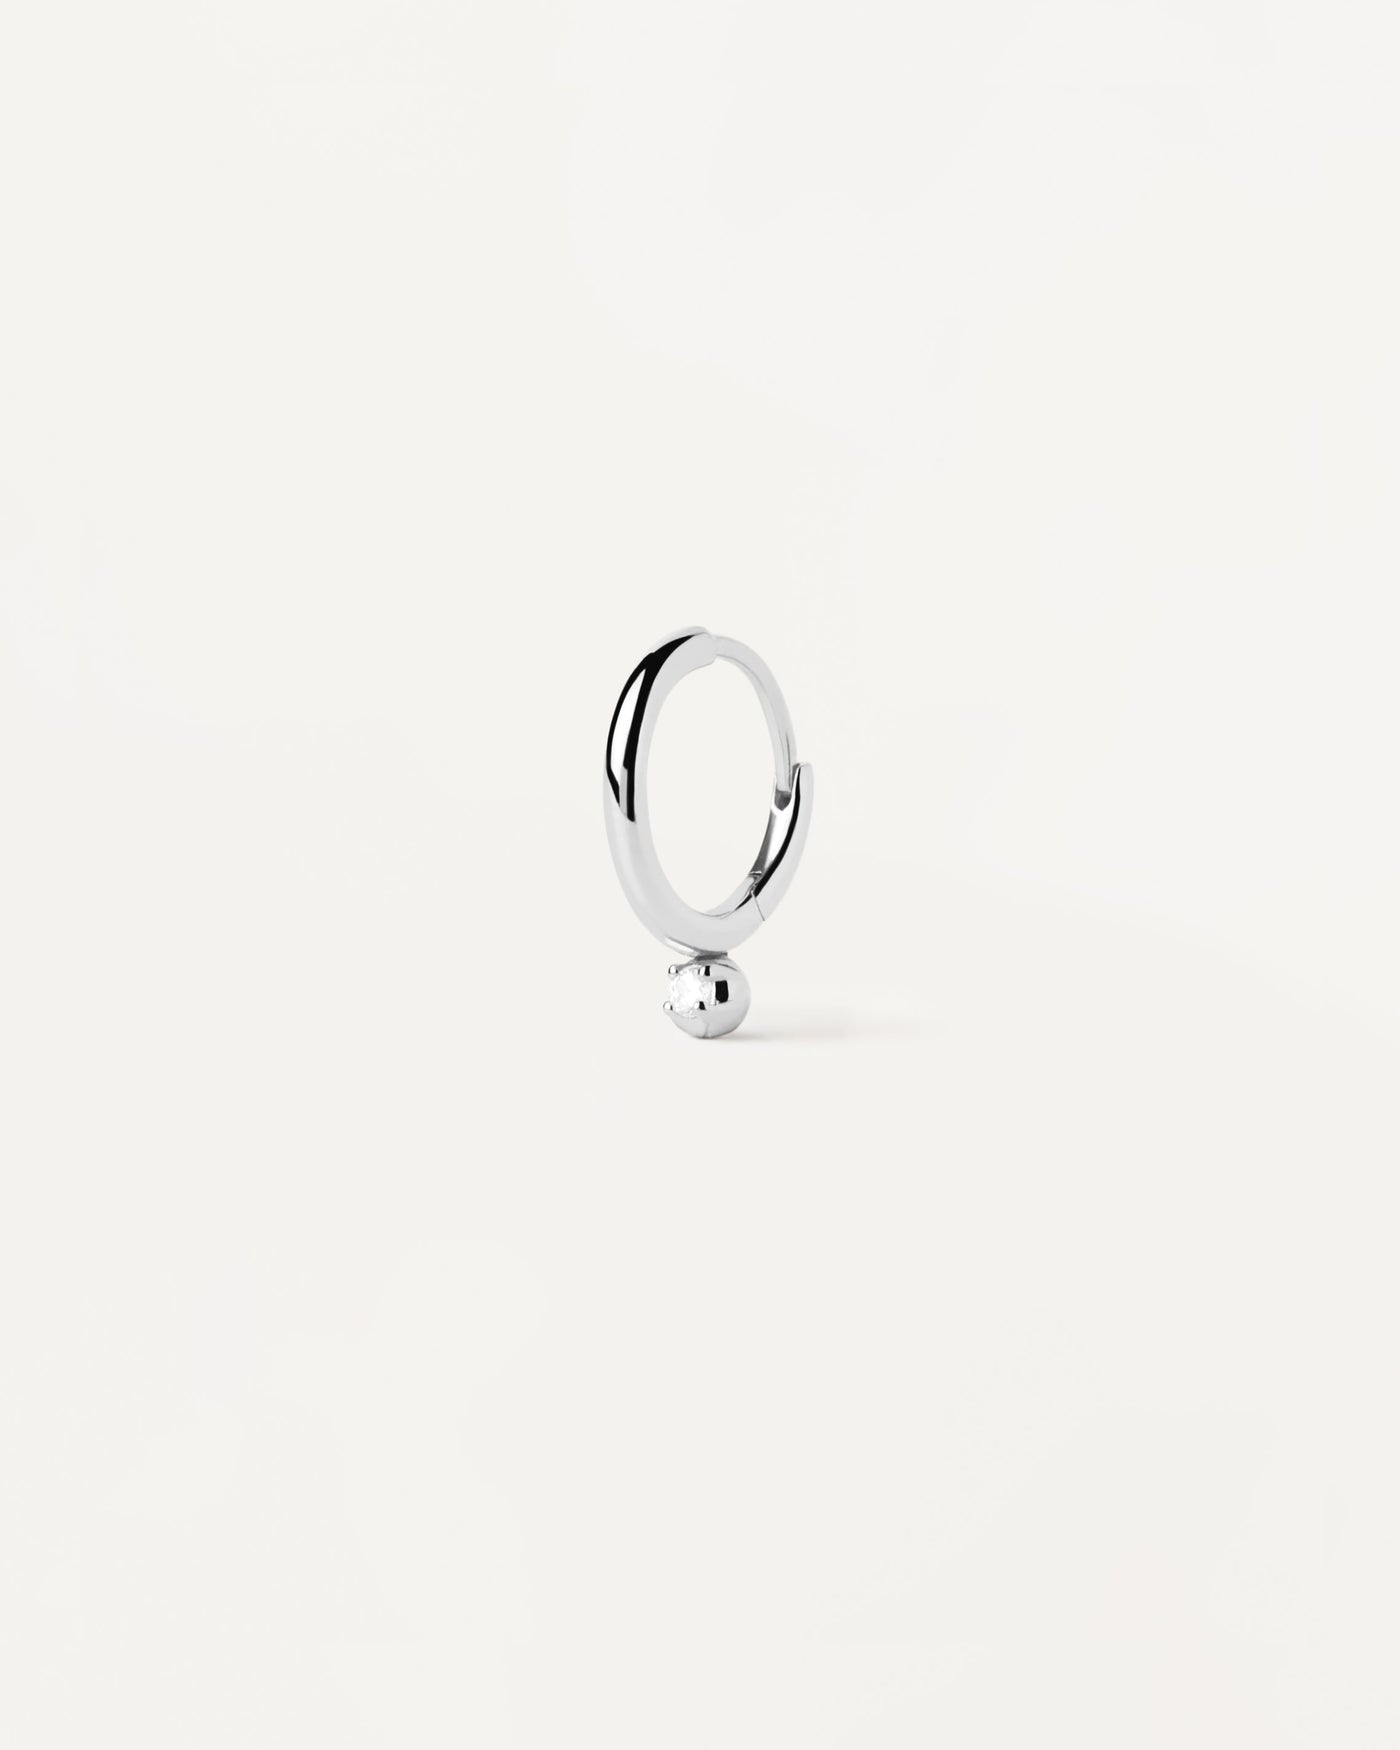 2023 Selection | Tide silver single hoop Earring. Sterling silver ear piercing with tiny white zirconia pendant. Get the latest arrival from PDPAOLA. Place your order safely and get this Best Seller. Free Shipping.